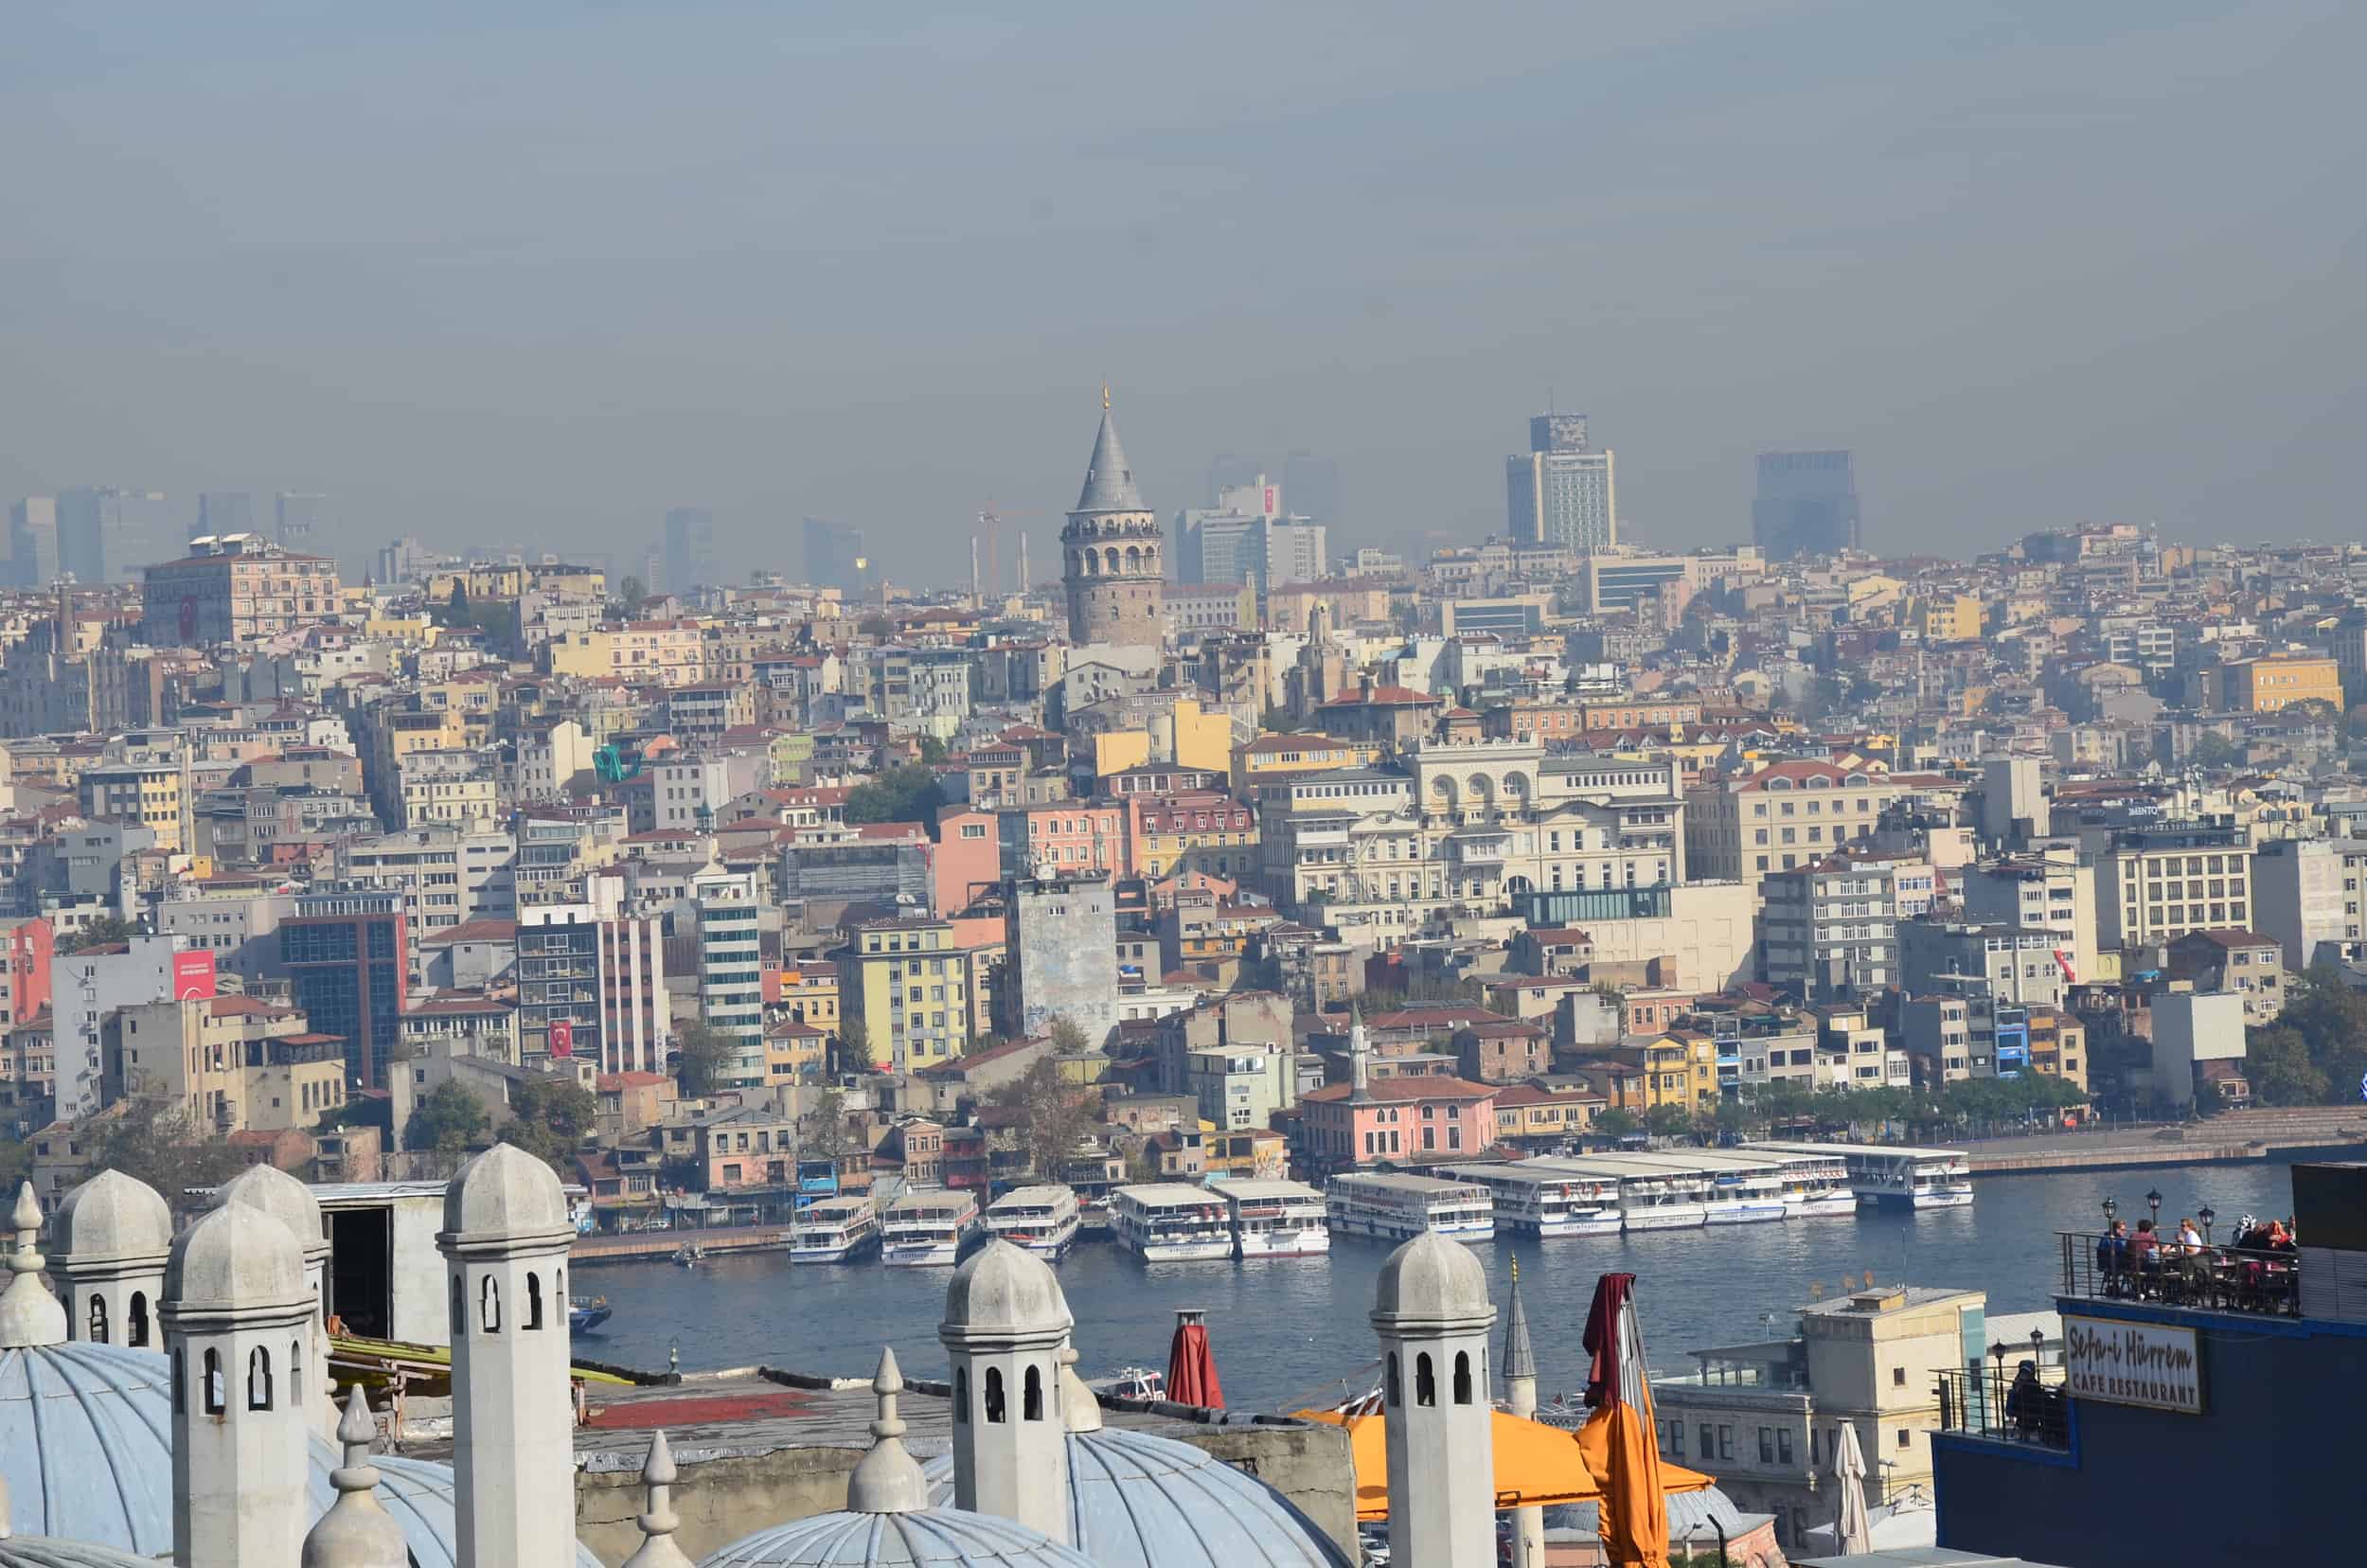 Looking towards the Galata Tower from the Süleymaniye Mosque in Istanbul, Turkey